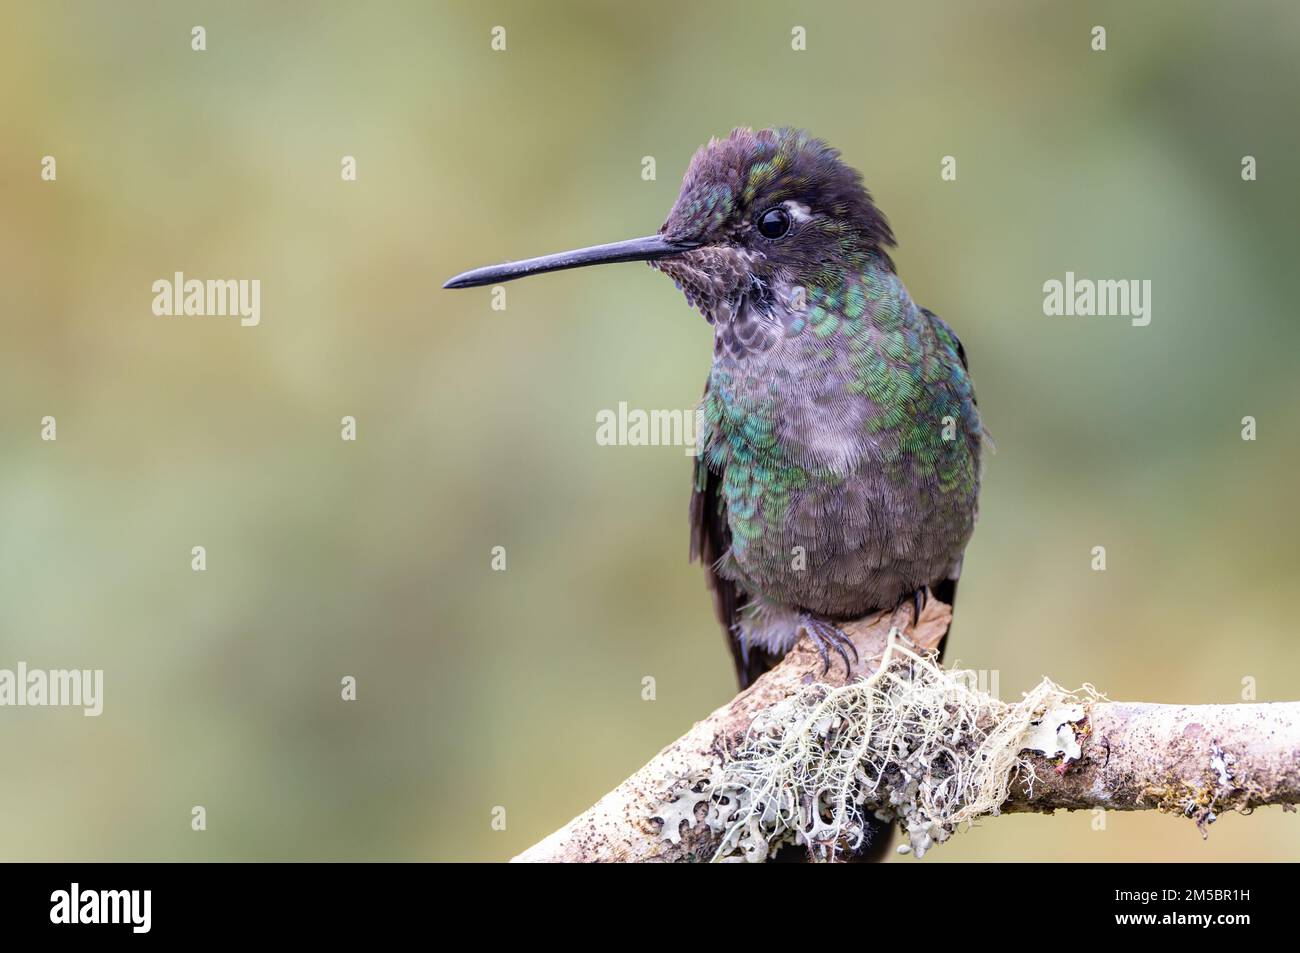 front view of a talamanca hummingbird perched on a branch Stock Photo